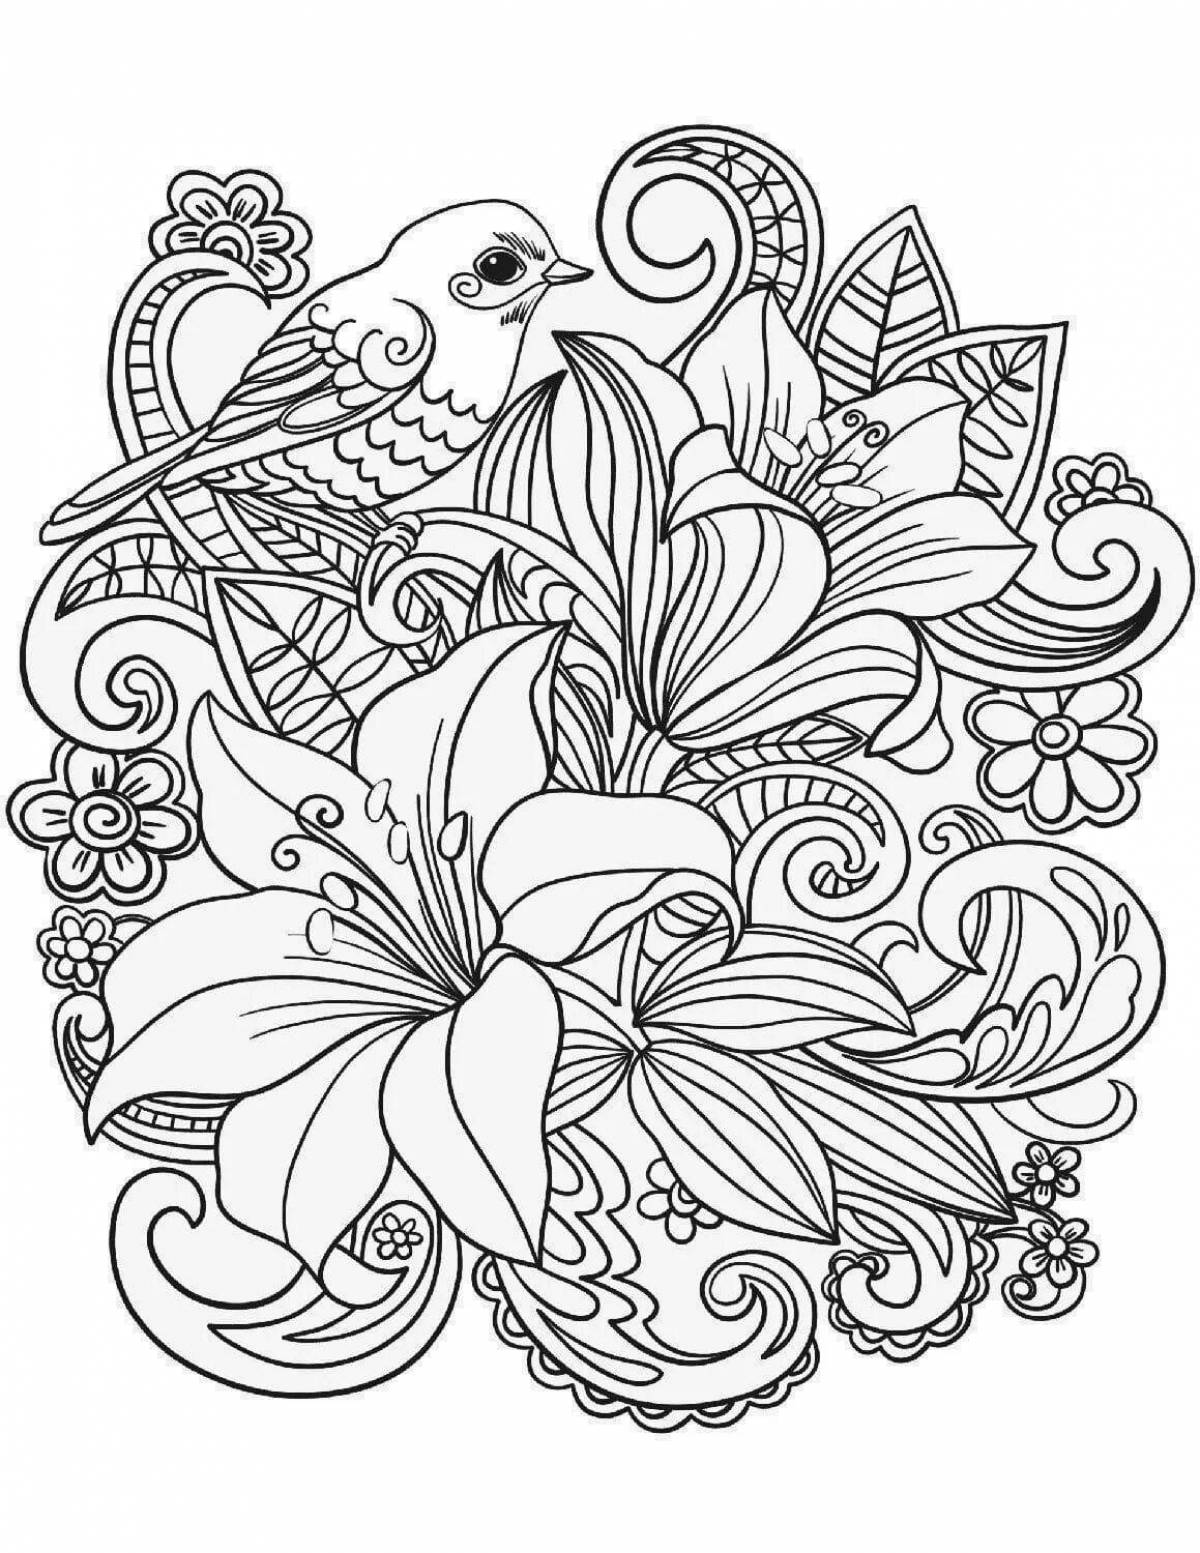 Exciting anti-stress spring coloring book